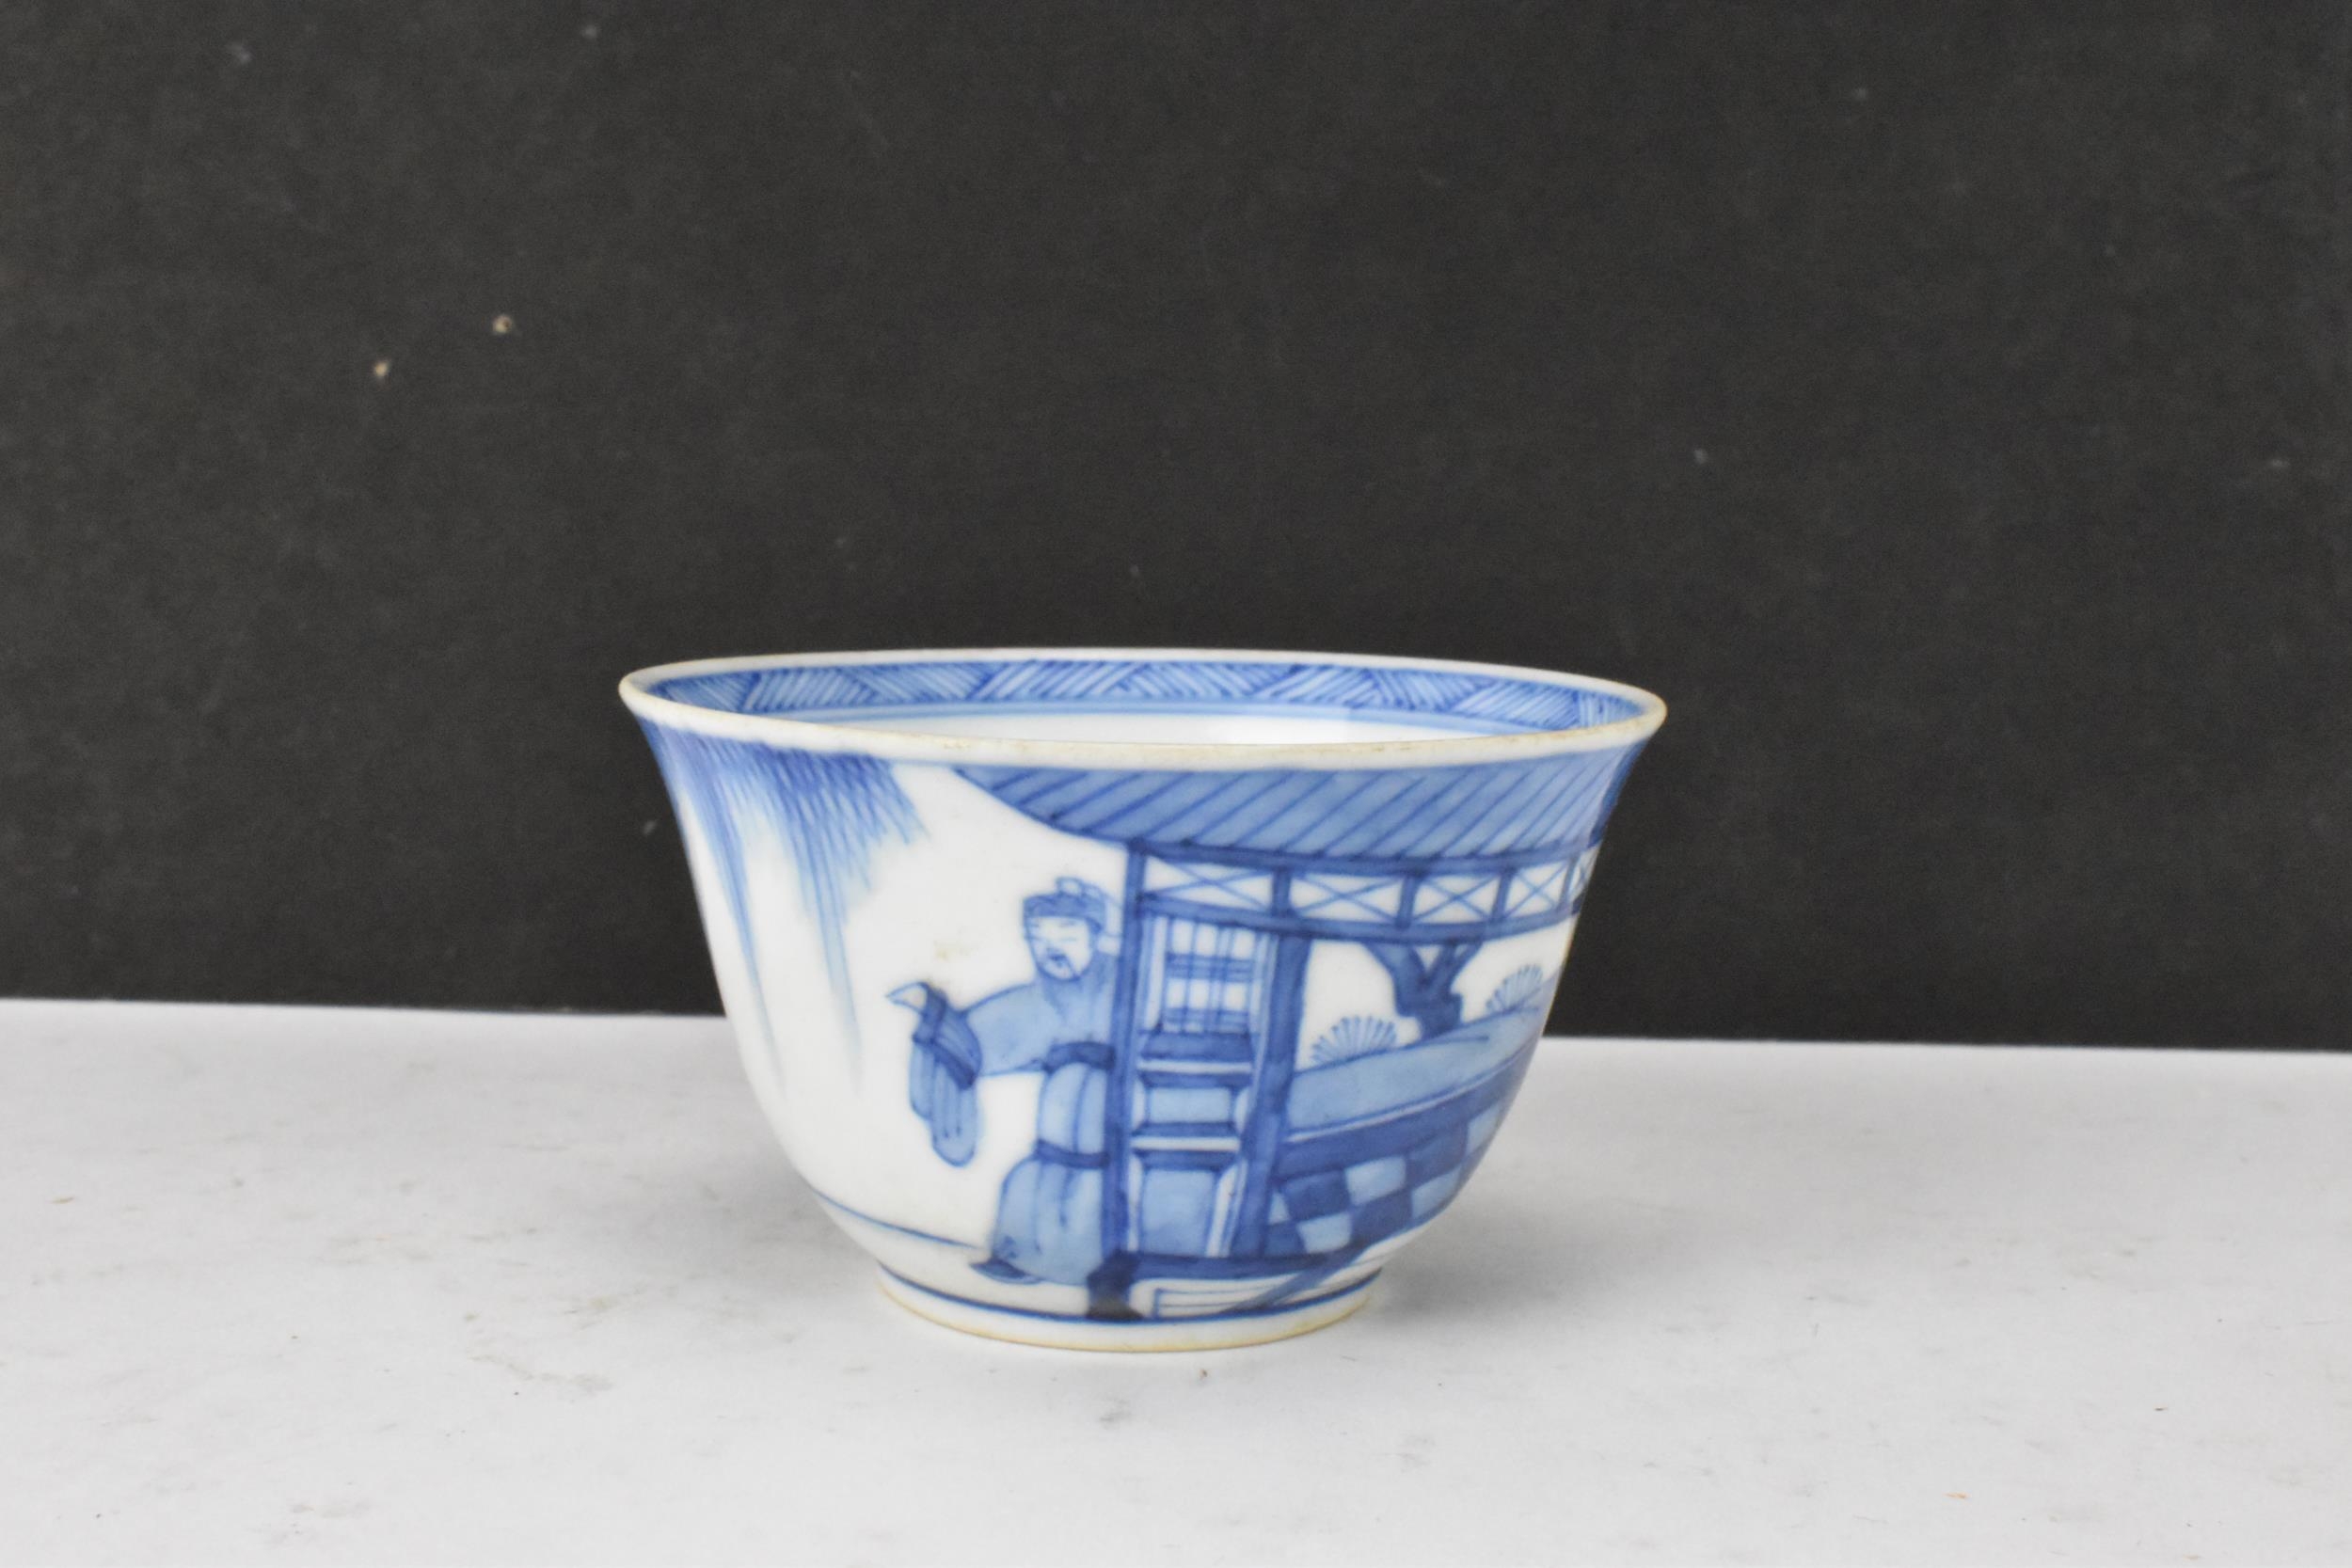 Three Chinese 20th century blue and white bowls, decorated with dragons and interiors with central - Image 6 of 9